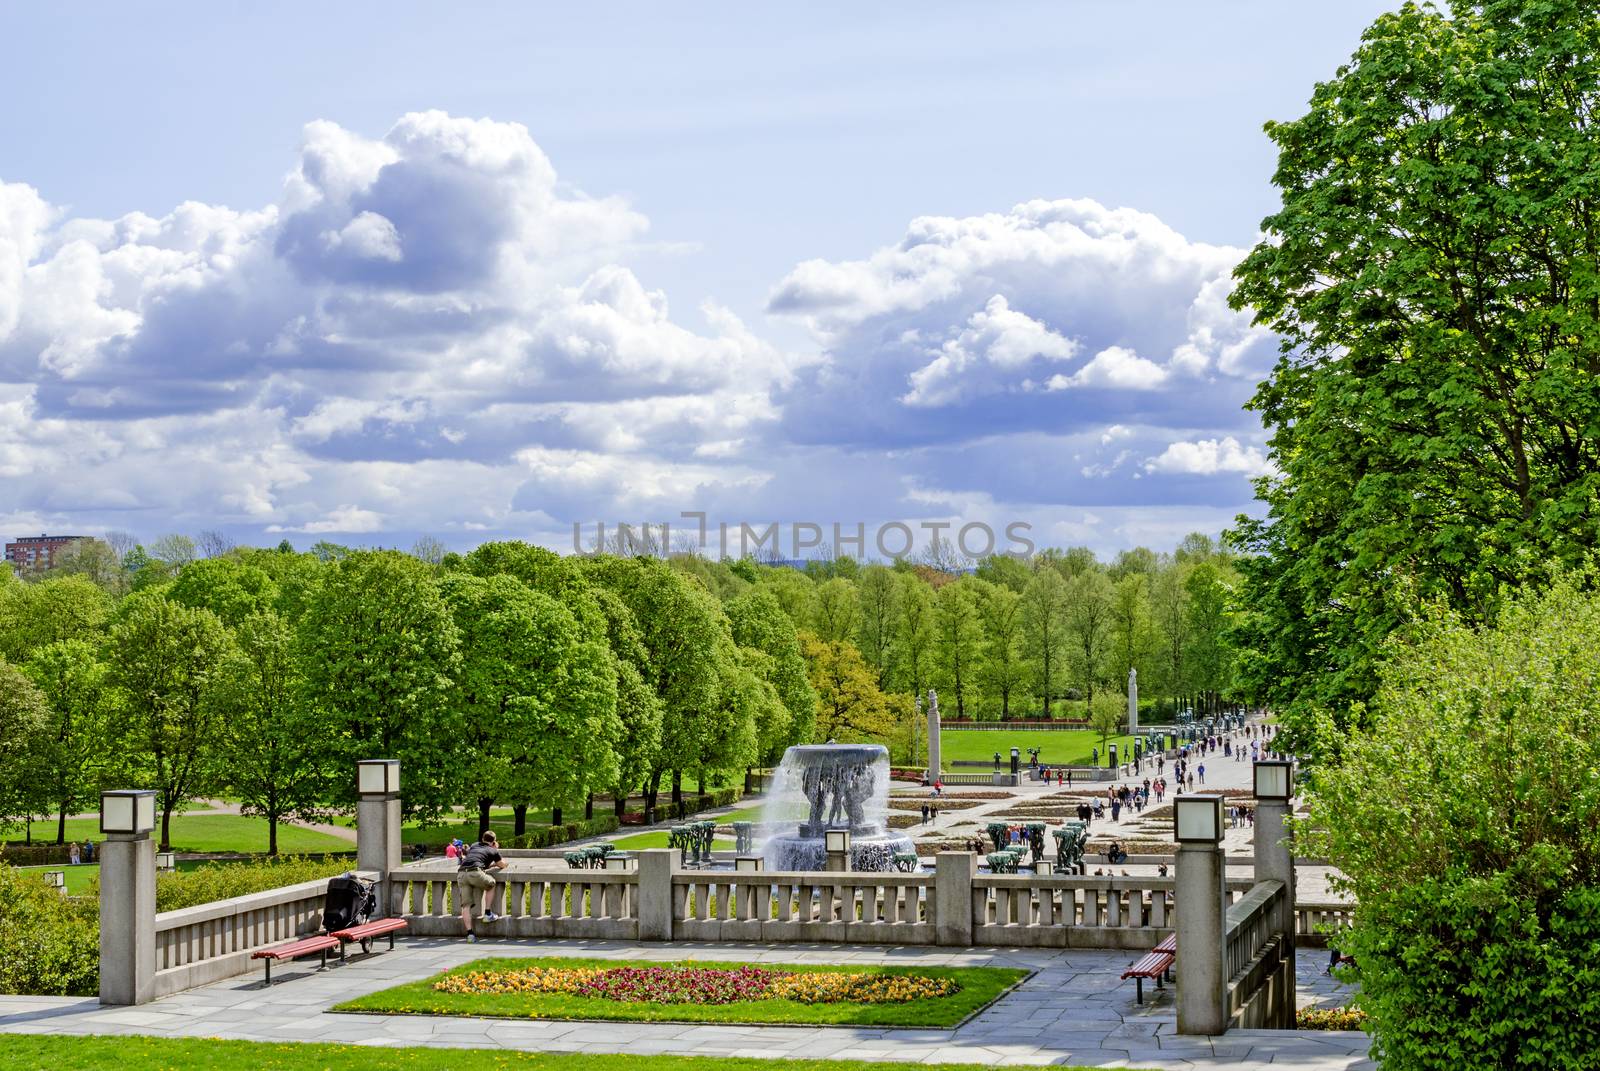 OSLO - MAY 18: Statues in Vigeland park in Oslo, Norway on May 18, 2012. The park covers 80 acres and features 212 bronze and granite sculptures created by Gustav Vigeland.